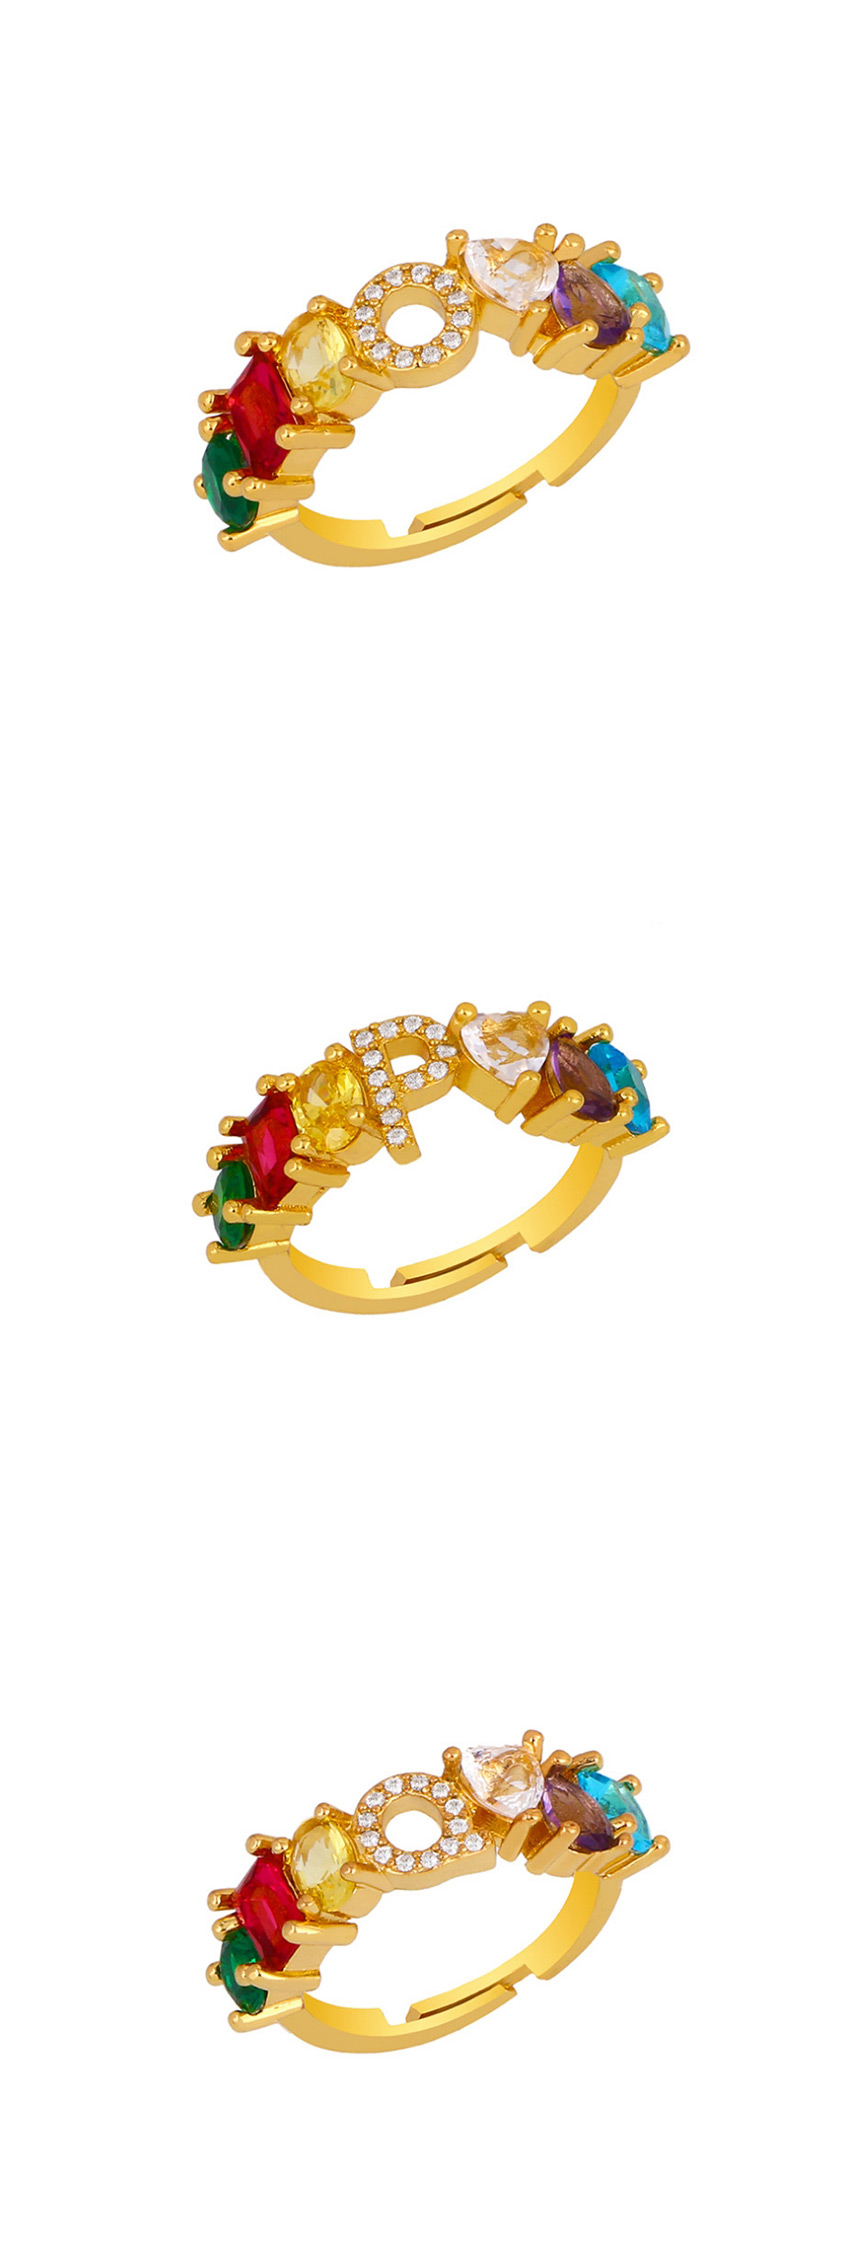 Fashion S Gold Heart-shaped Adjustable Ring With Colorful Diamond Letters,Rings